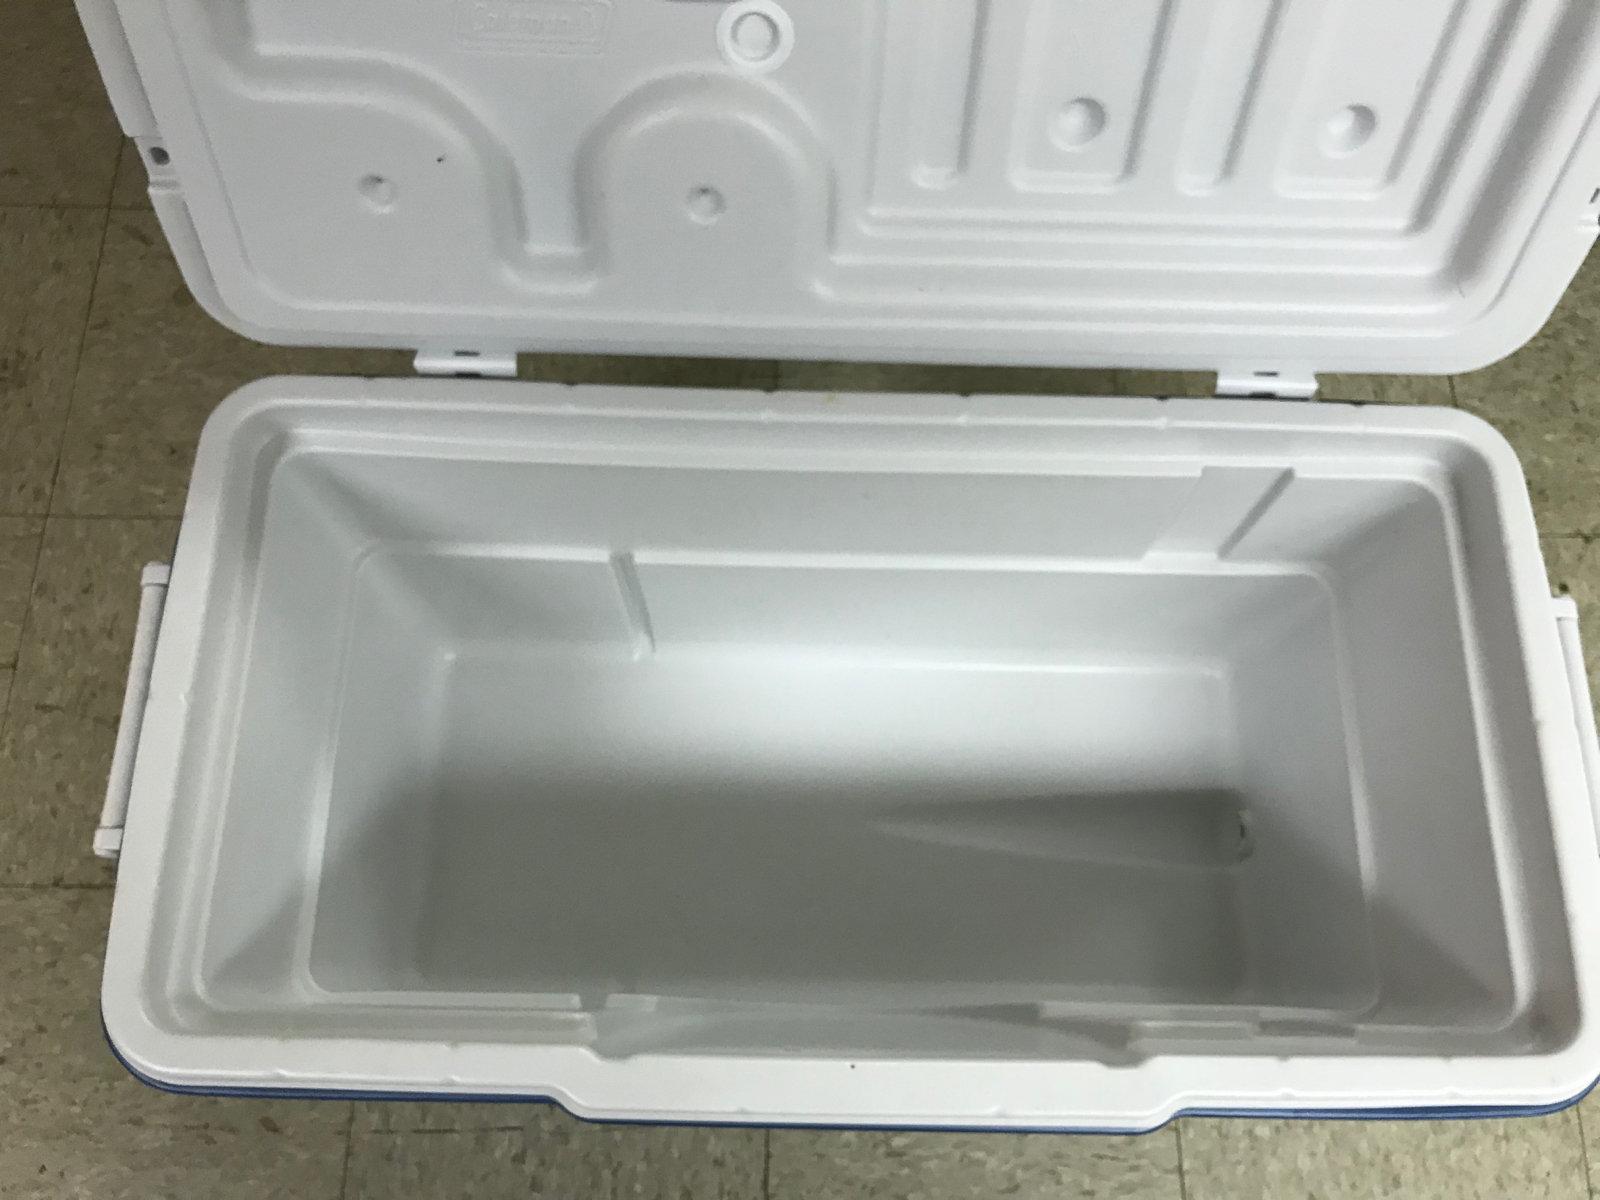 Coleman Xtreme cooler 29 inches long